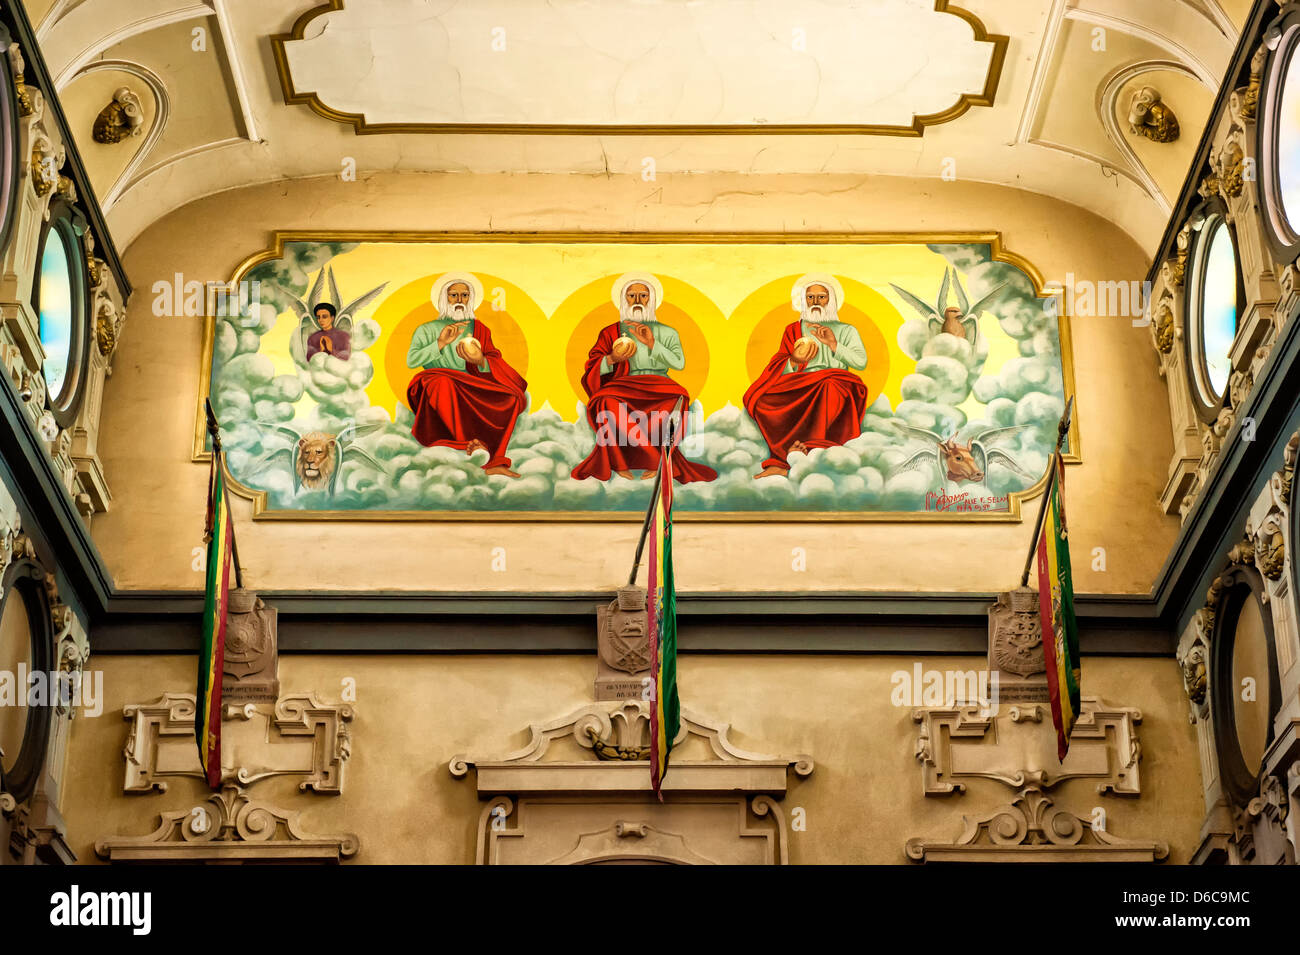 Holy Trinity Cathedral (Kiddist Selassie), Wall paintings, Addis Ababa, Ethiopia Stock Photo